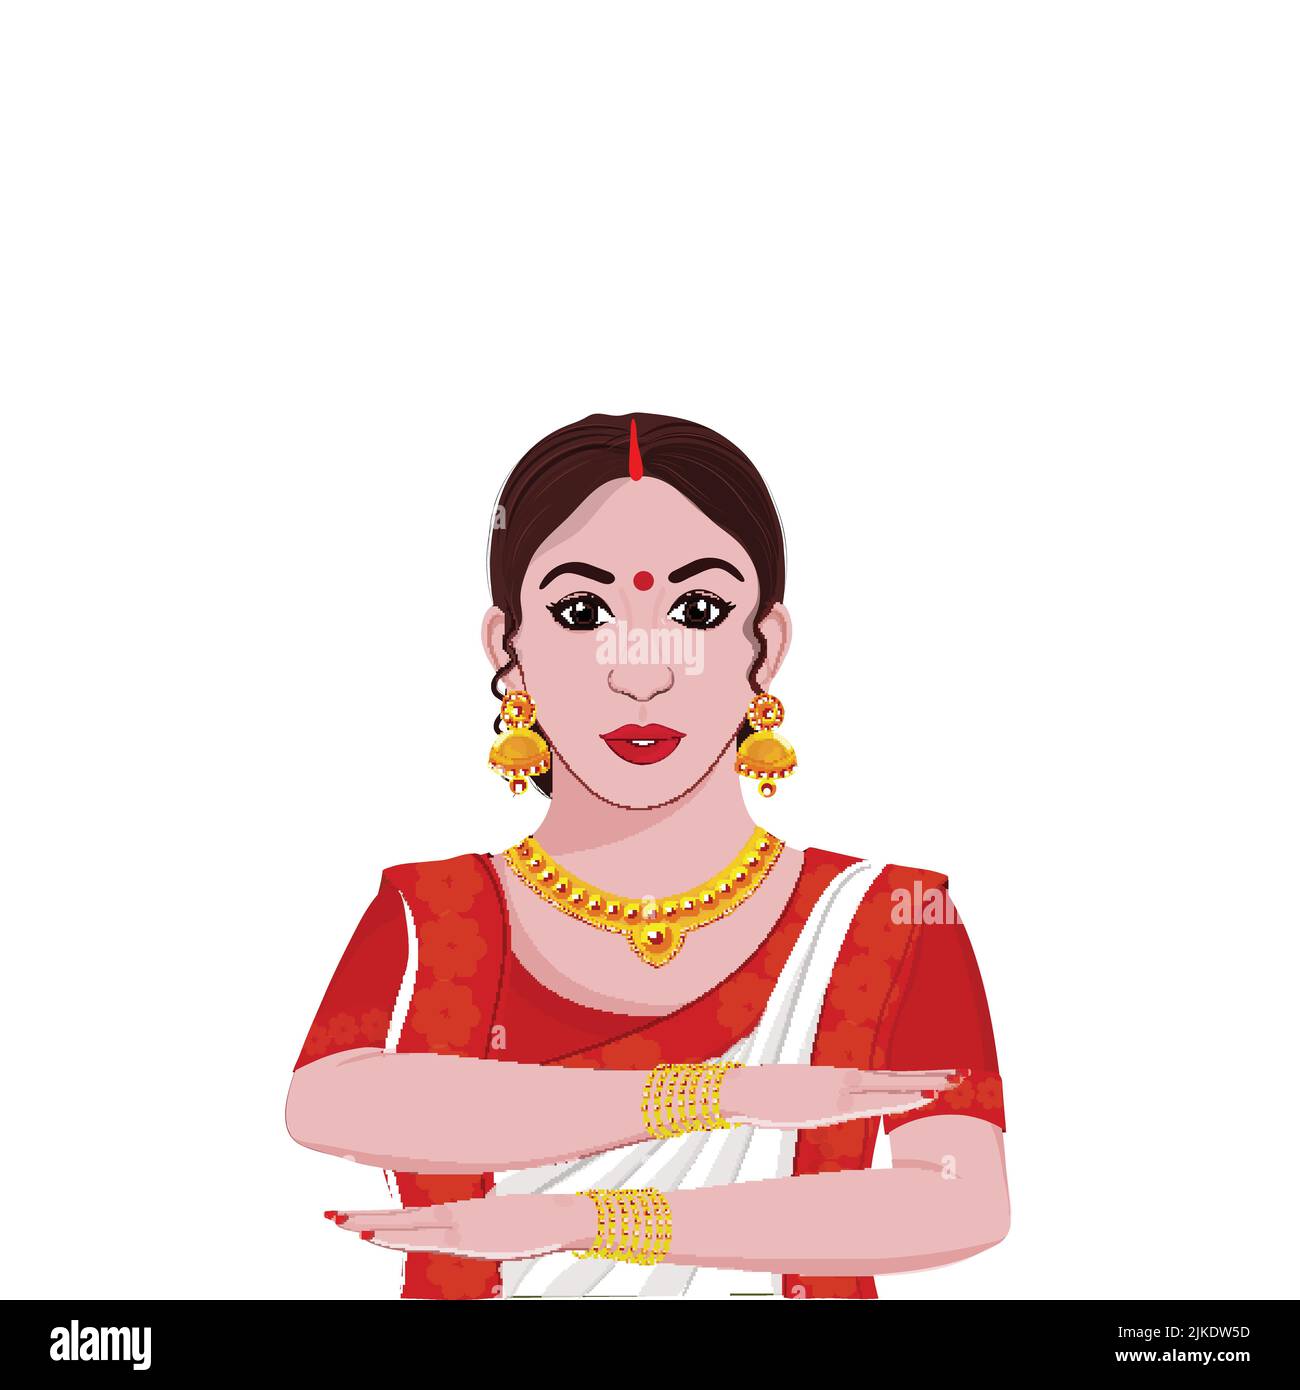 Bengali Woman Making Equality Arm Gesture In Traditional Attire. Stock Vector